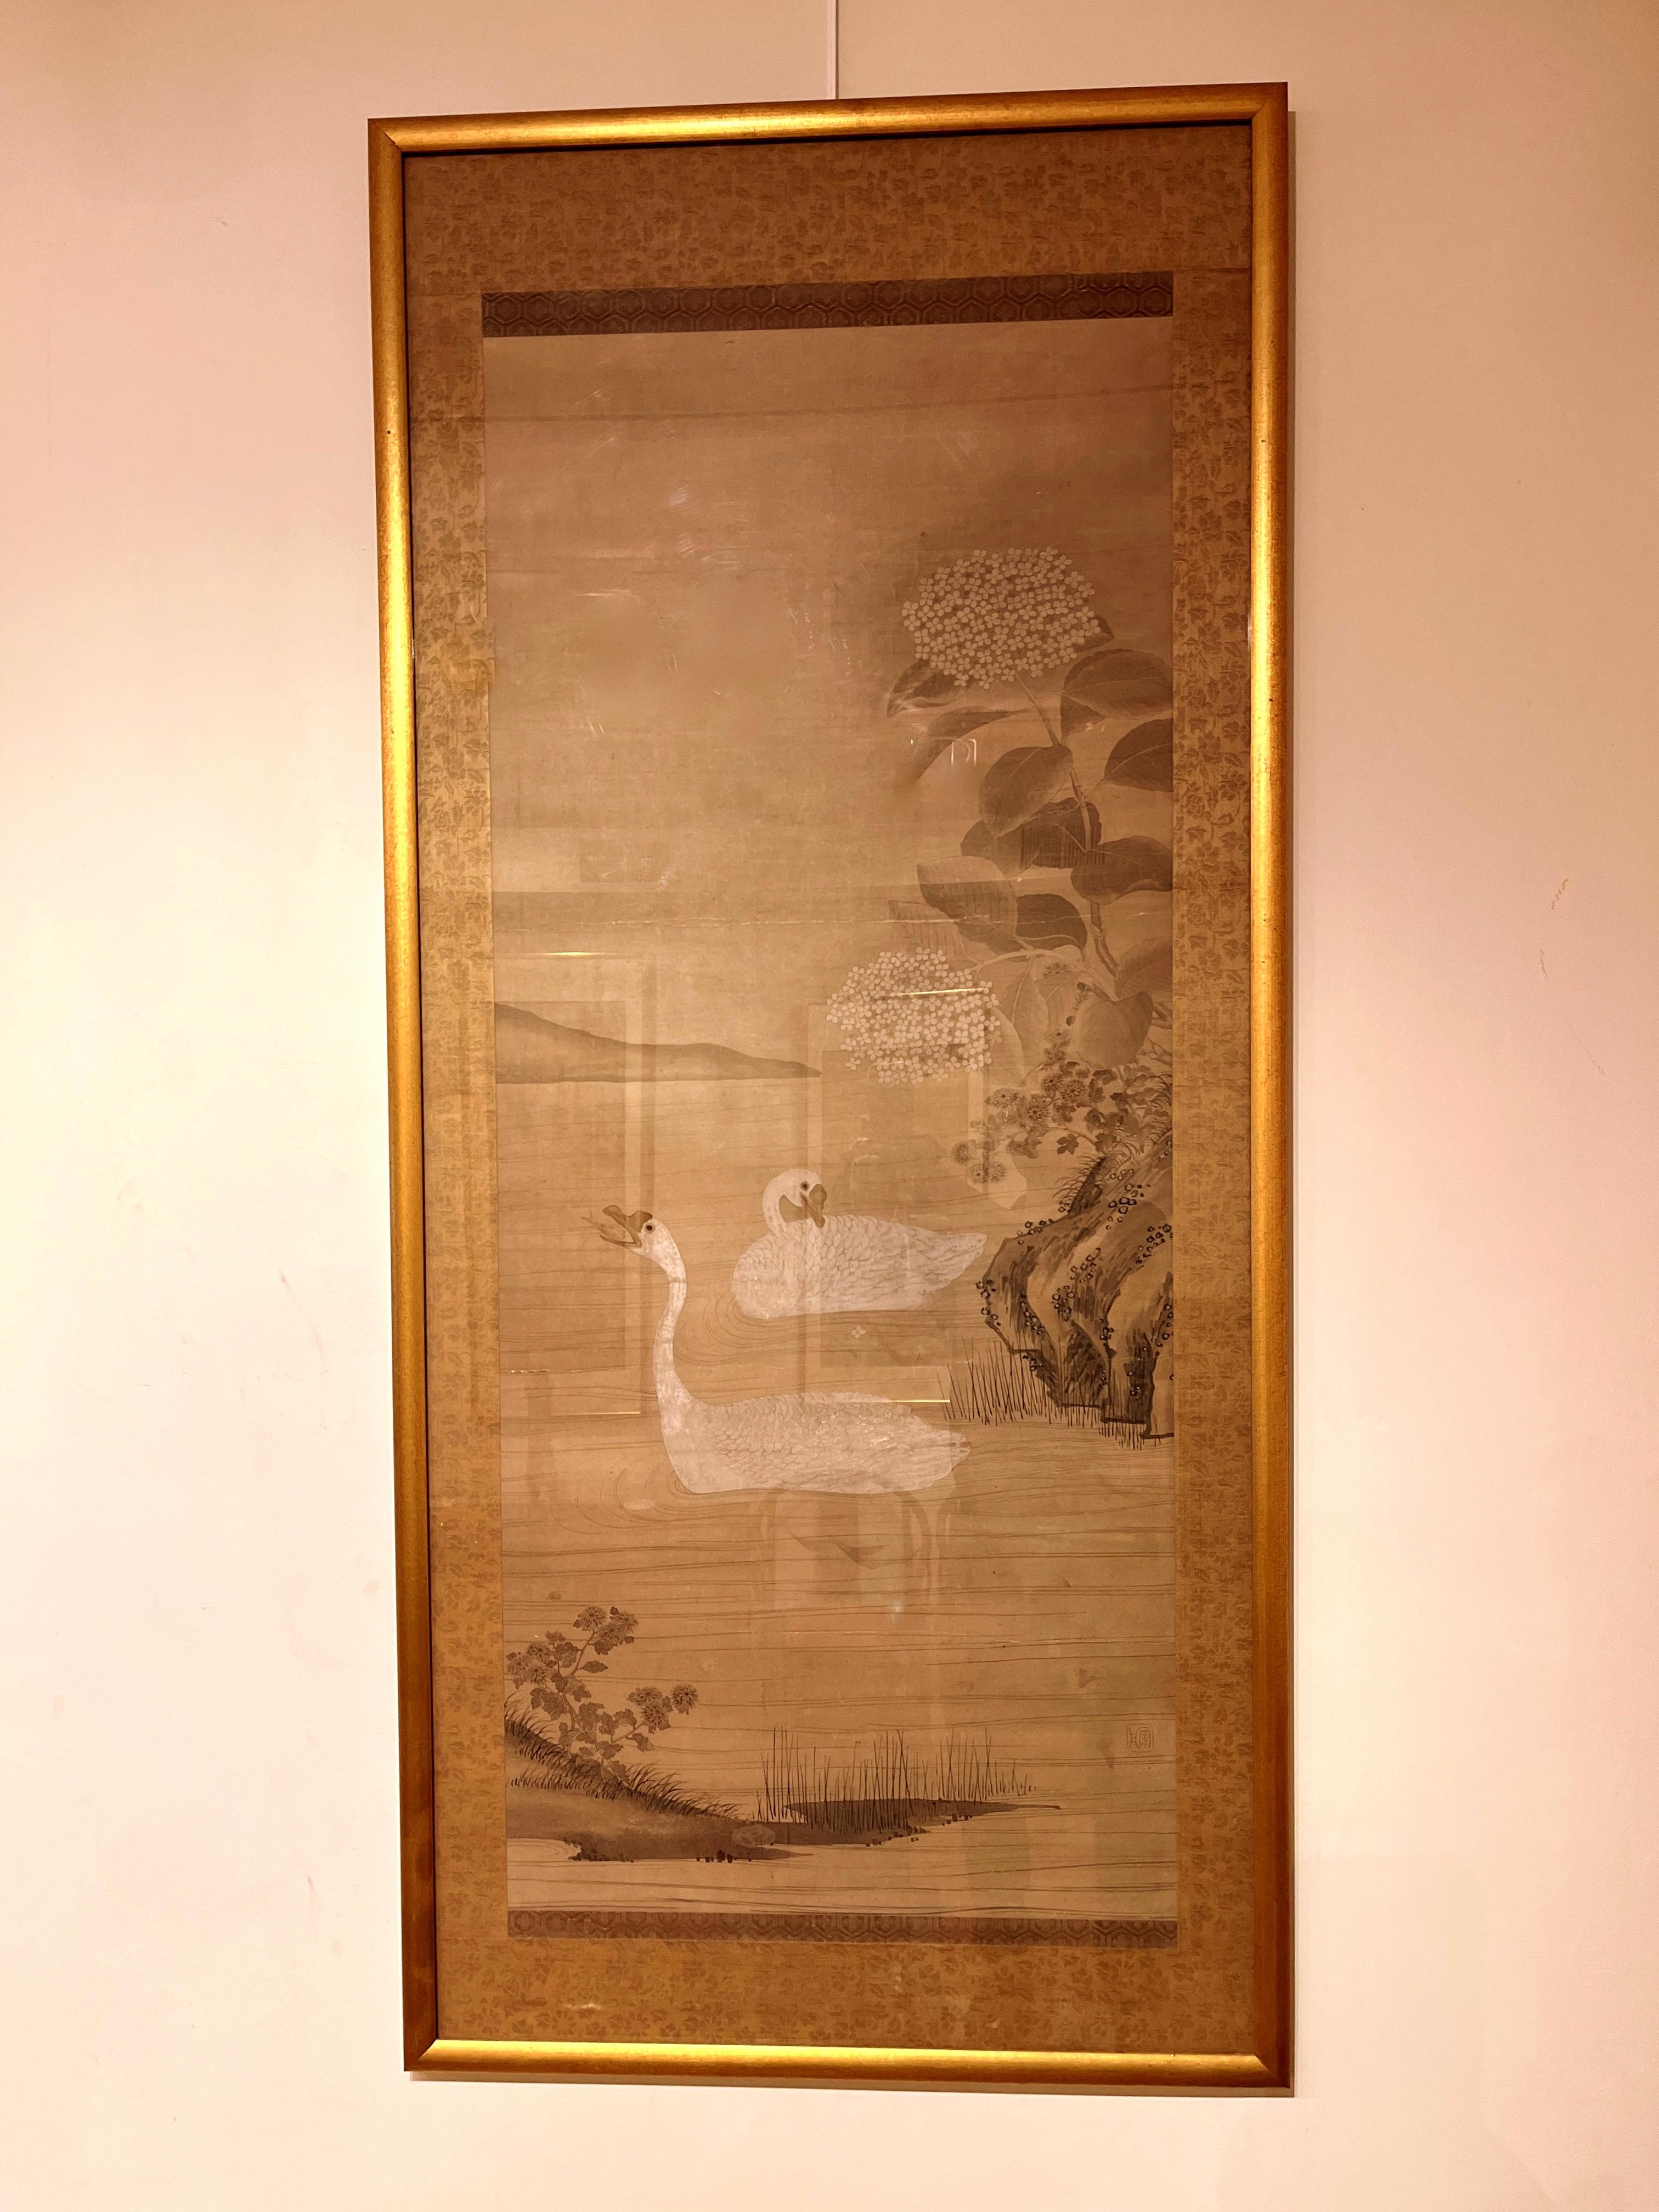 Framed Japanese brush painting of two white geese swimming in a pond, 
19th century, ink on paper, original brocade mount.
Overall size with frame:  58